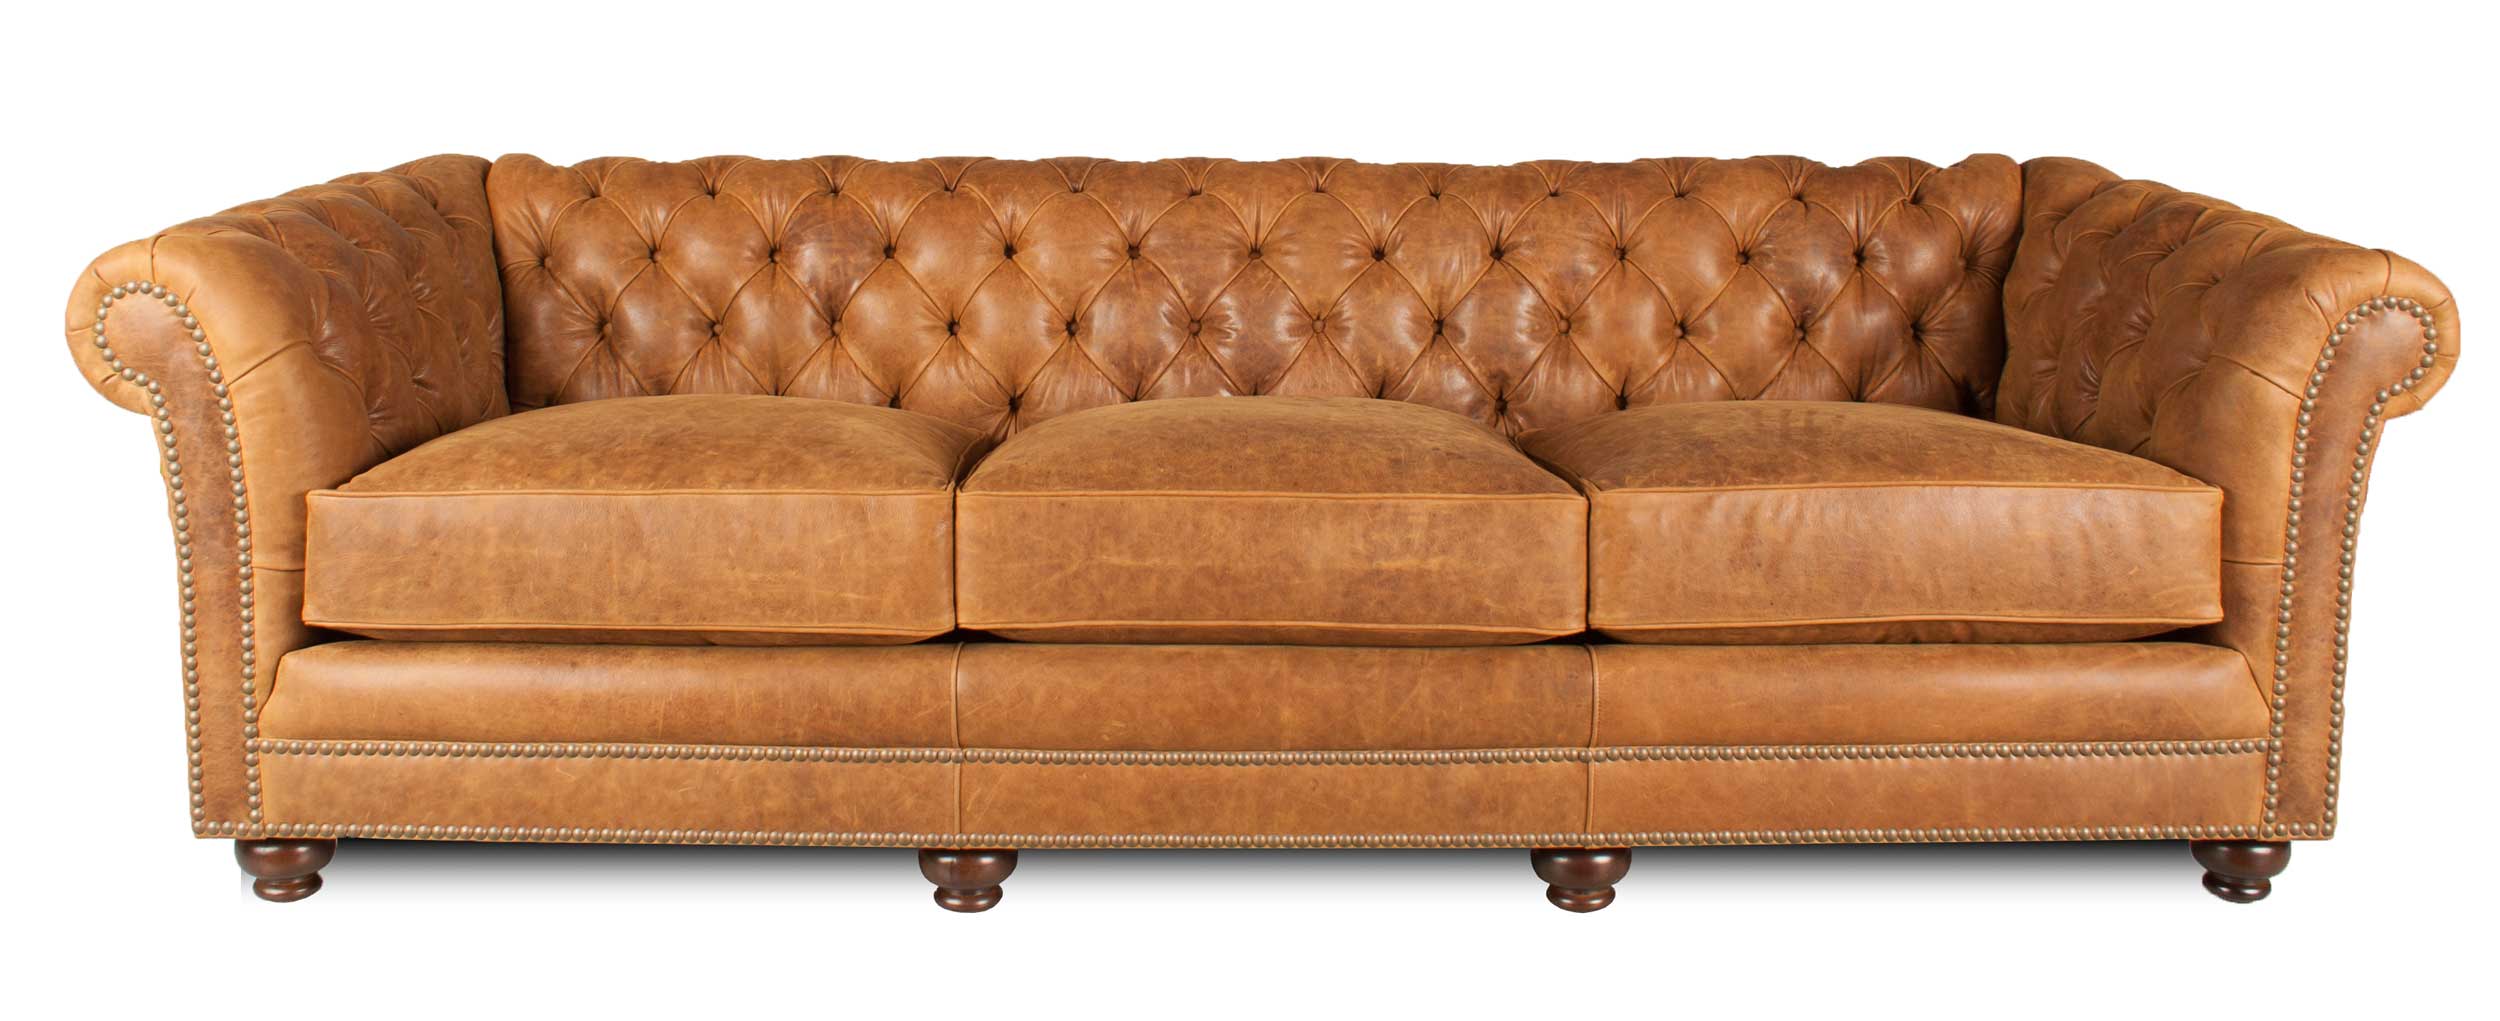 Deep Seated Sofas For The Big And Tall, Leather Upholstery Chicago